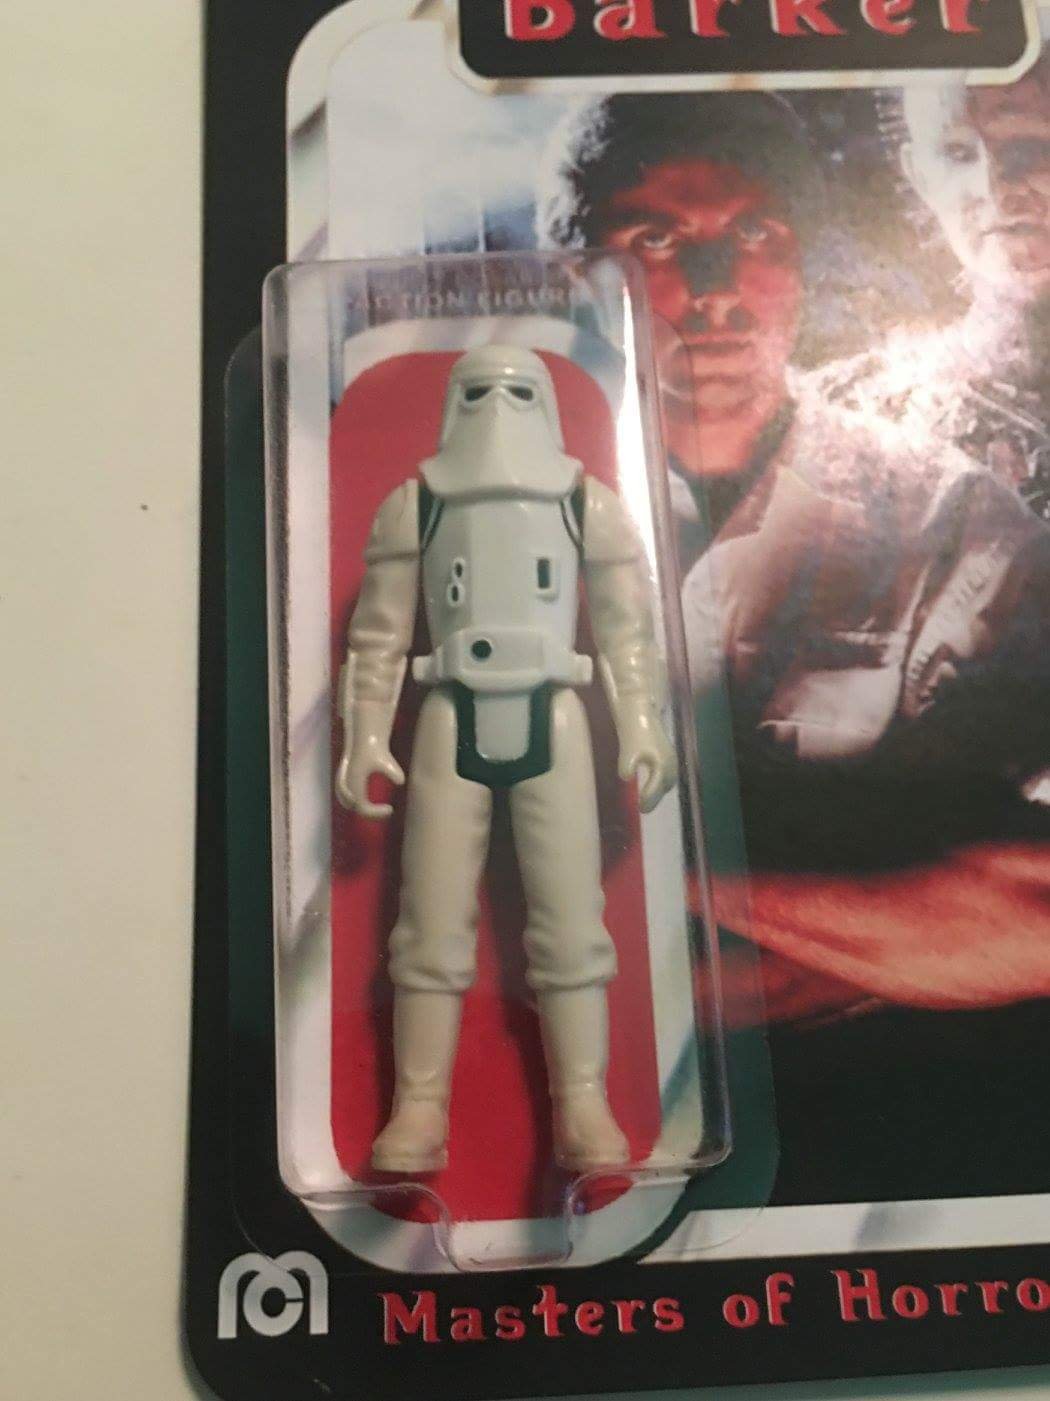 Empire Blisters is your one stop shop for selling 3 3/4” Action Figure Replacement Blisters. Star Wars, GI Joe, and Reaction Action Figure Customs.